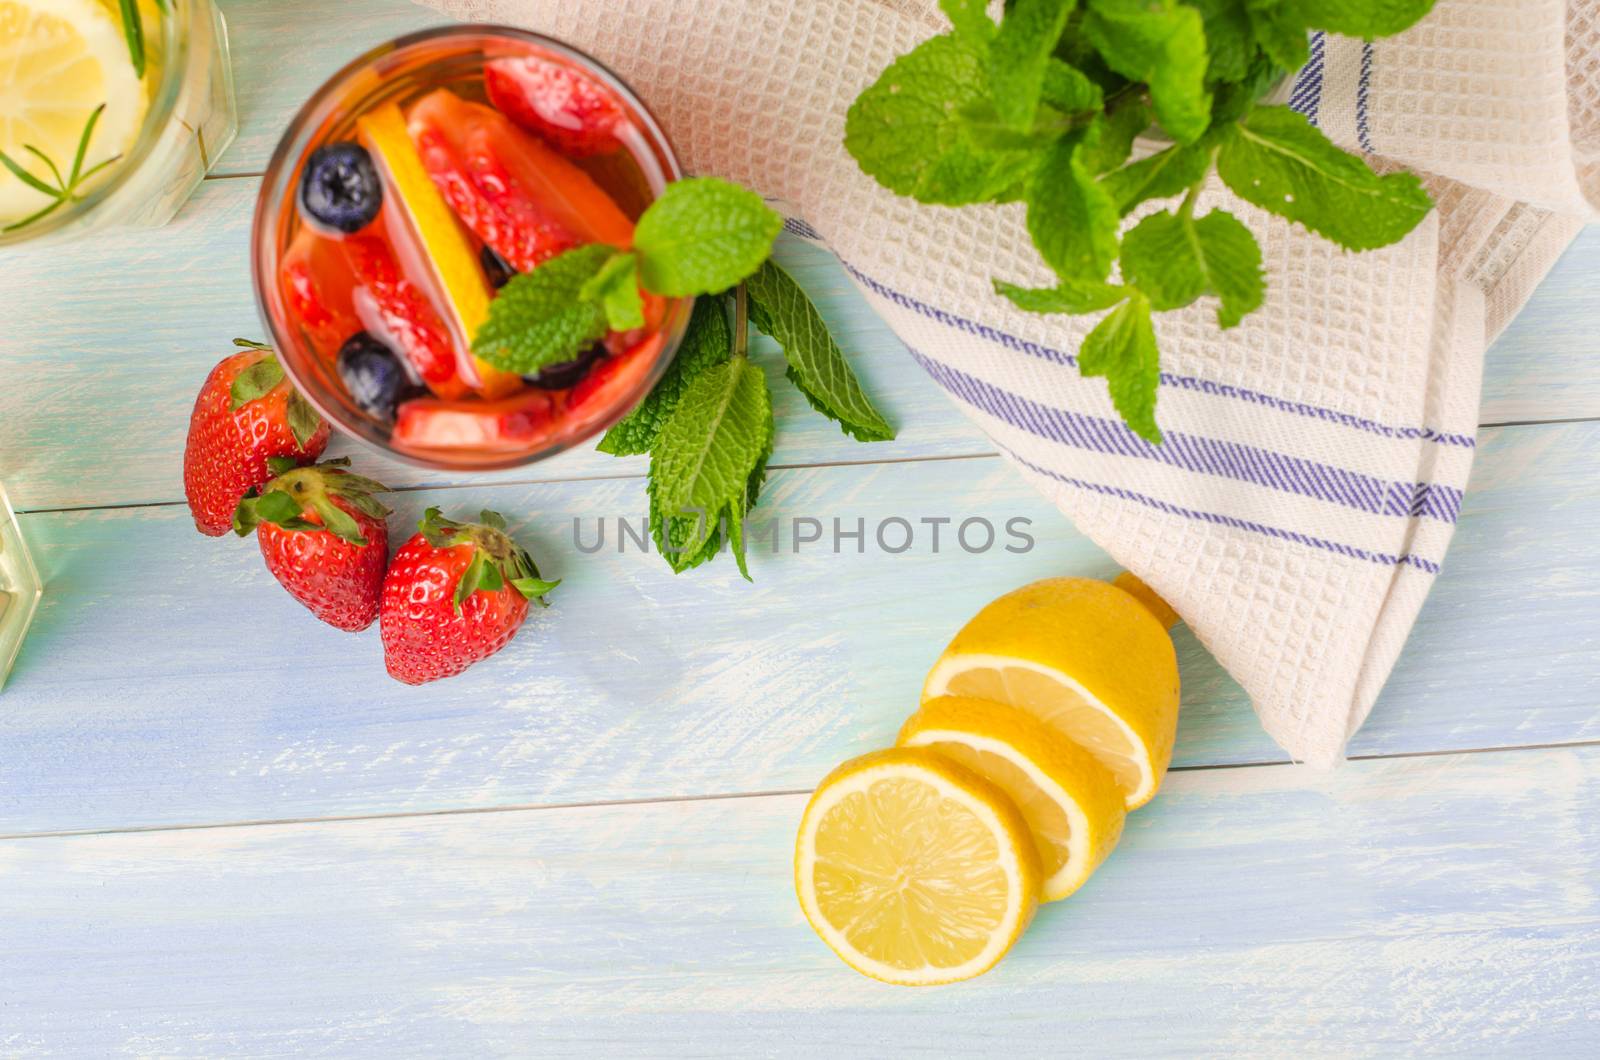 Detox fruit infused flavored water. Refreshing summer homemade cocktail with lemon, orange, strawberries and blueberries